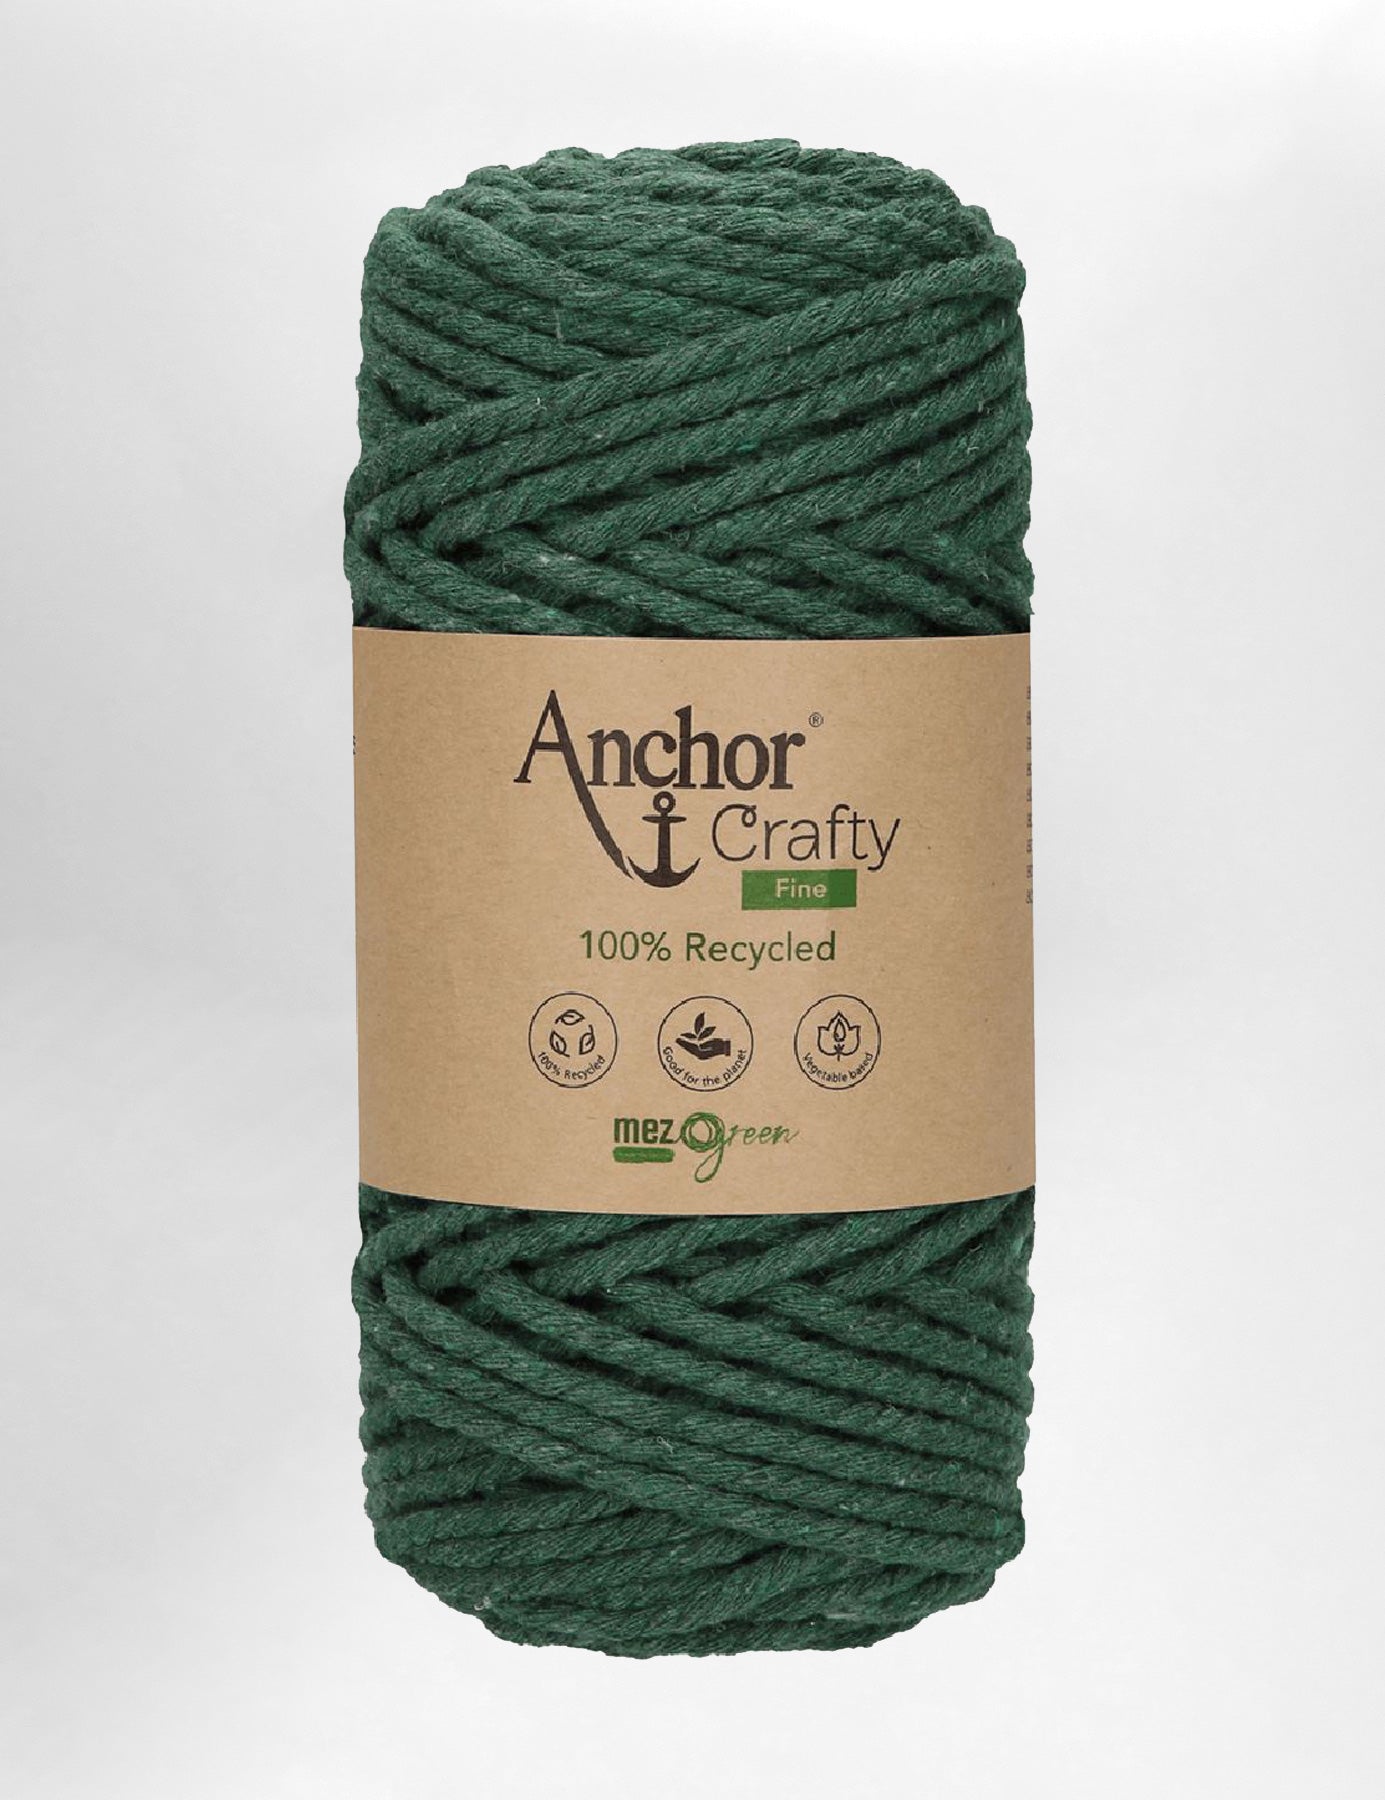 Anchor Crafty 3mm Forest 3ply recycled cotton macrame cord (65m)